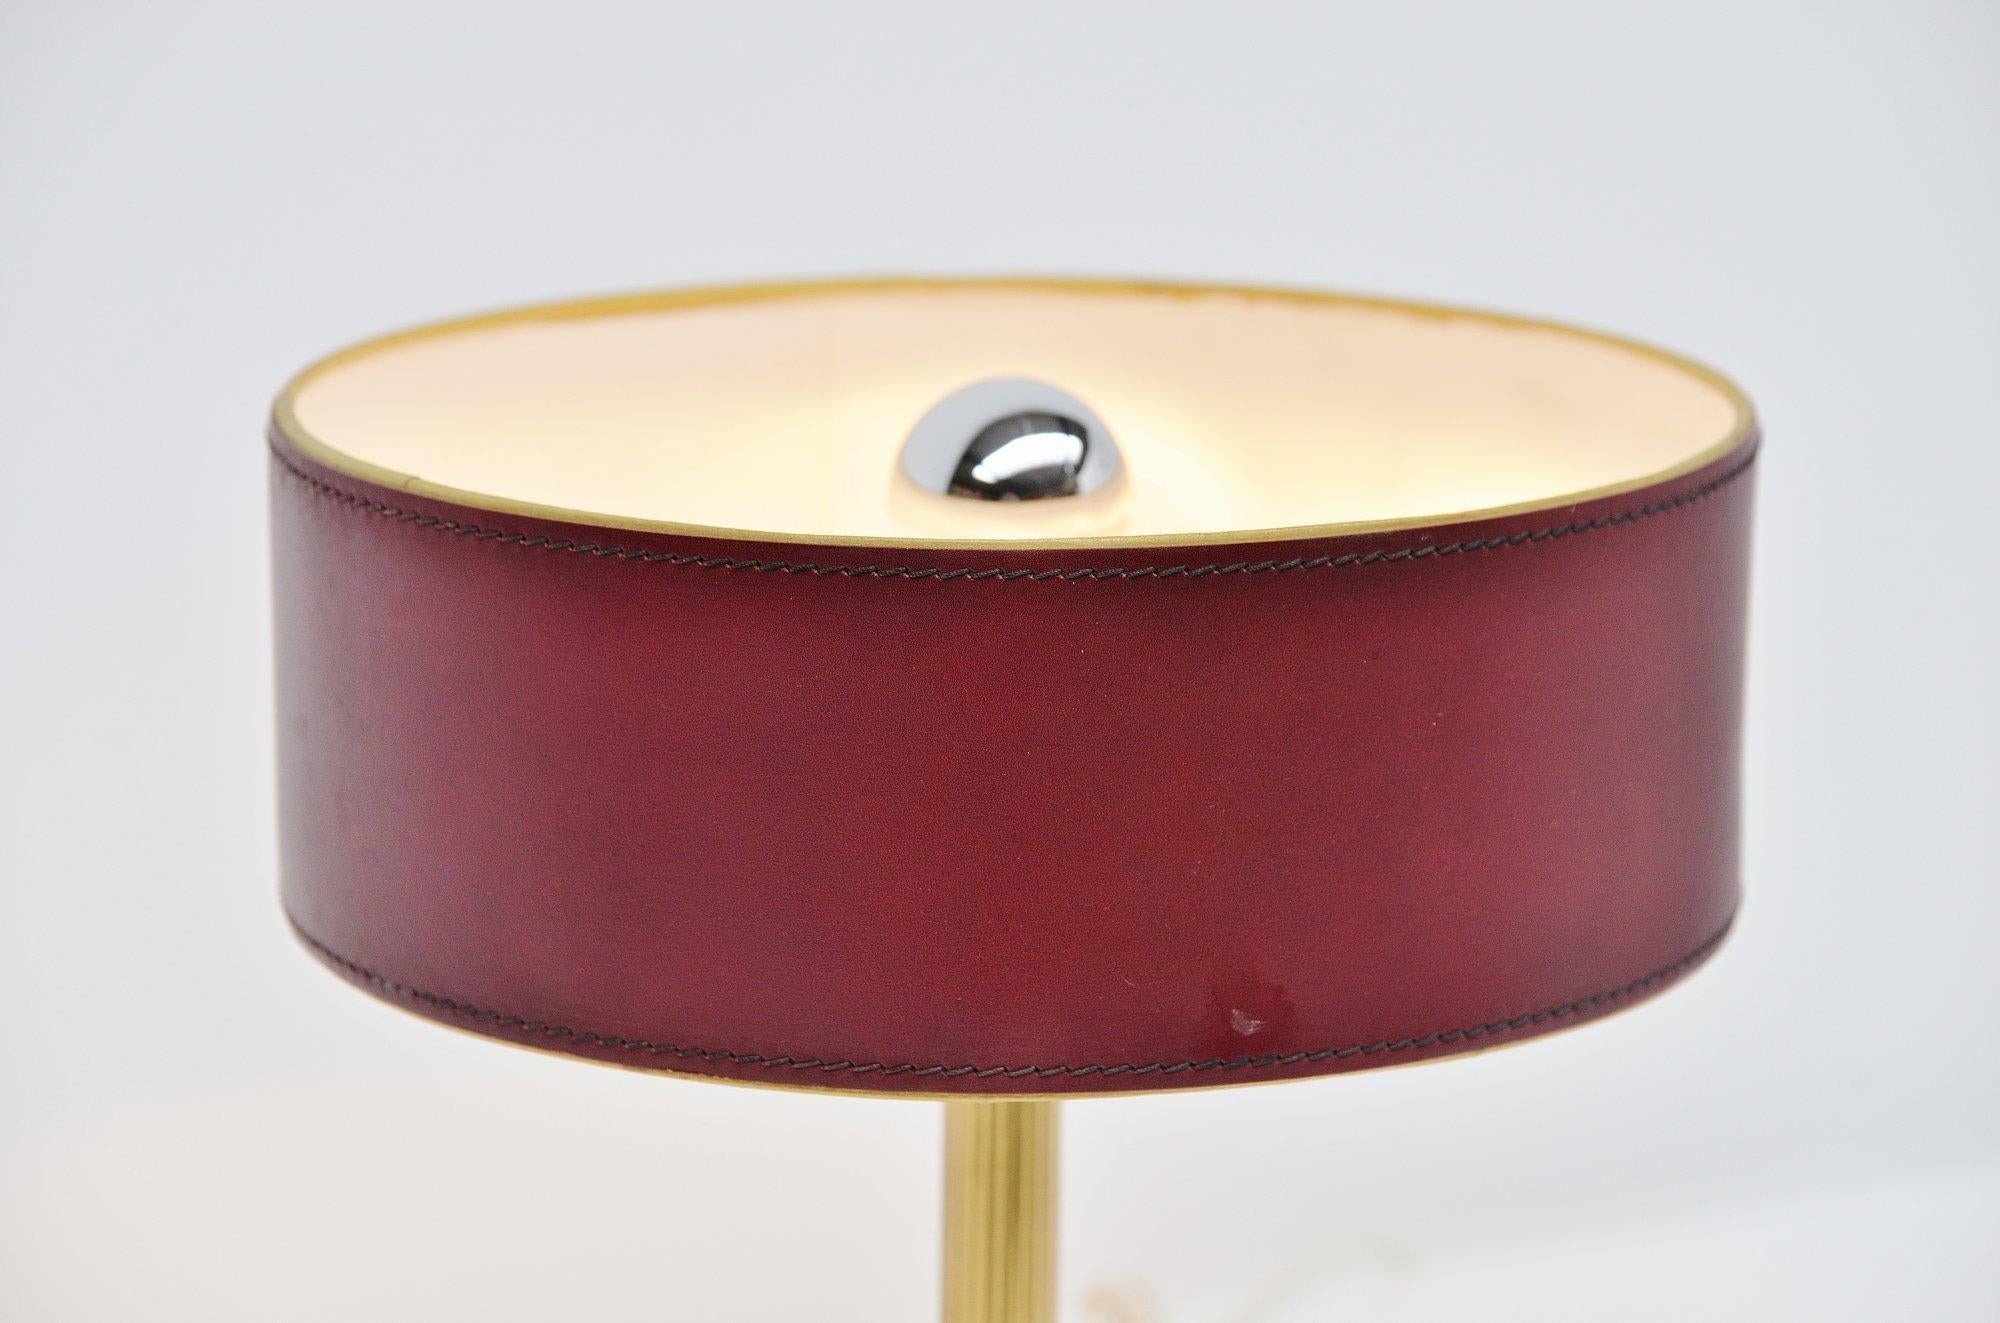 Very nice and highly decorative table lamp designed by Jacques Adnet, France, 1960. This leather clad table lamp has a square shade and a brass stem, the shade is made of leather too. High quality stitching on this lamp. The lamp is in very nice